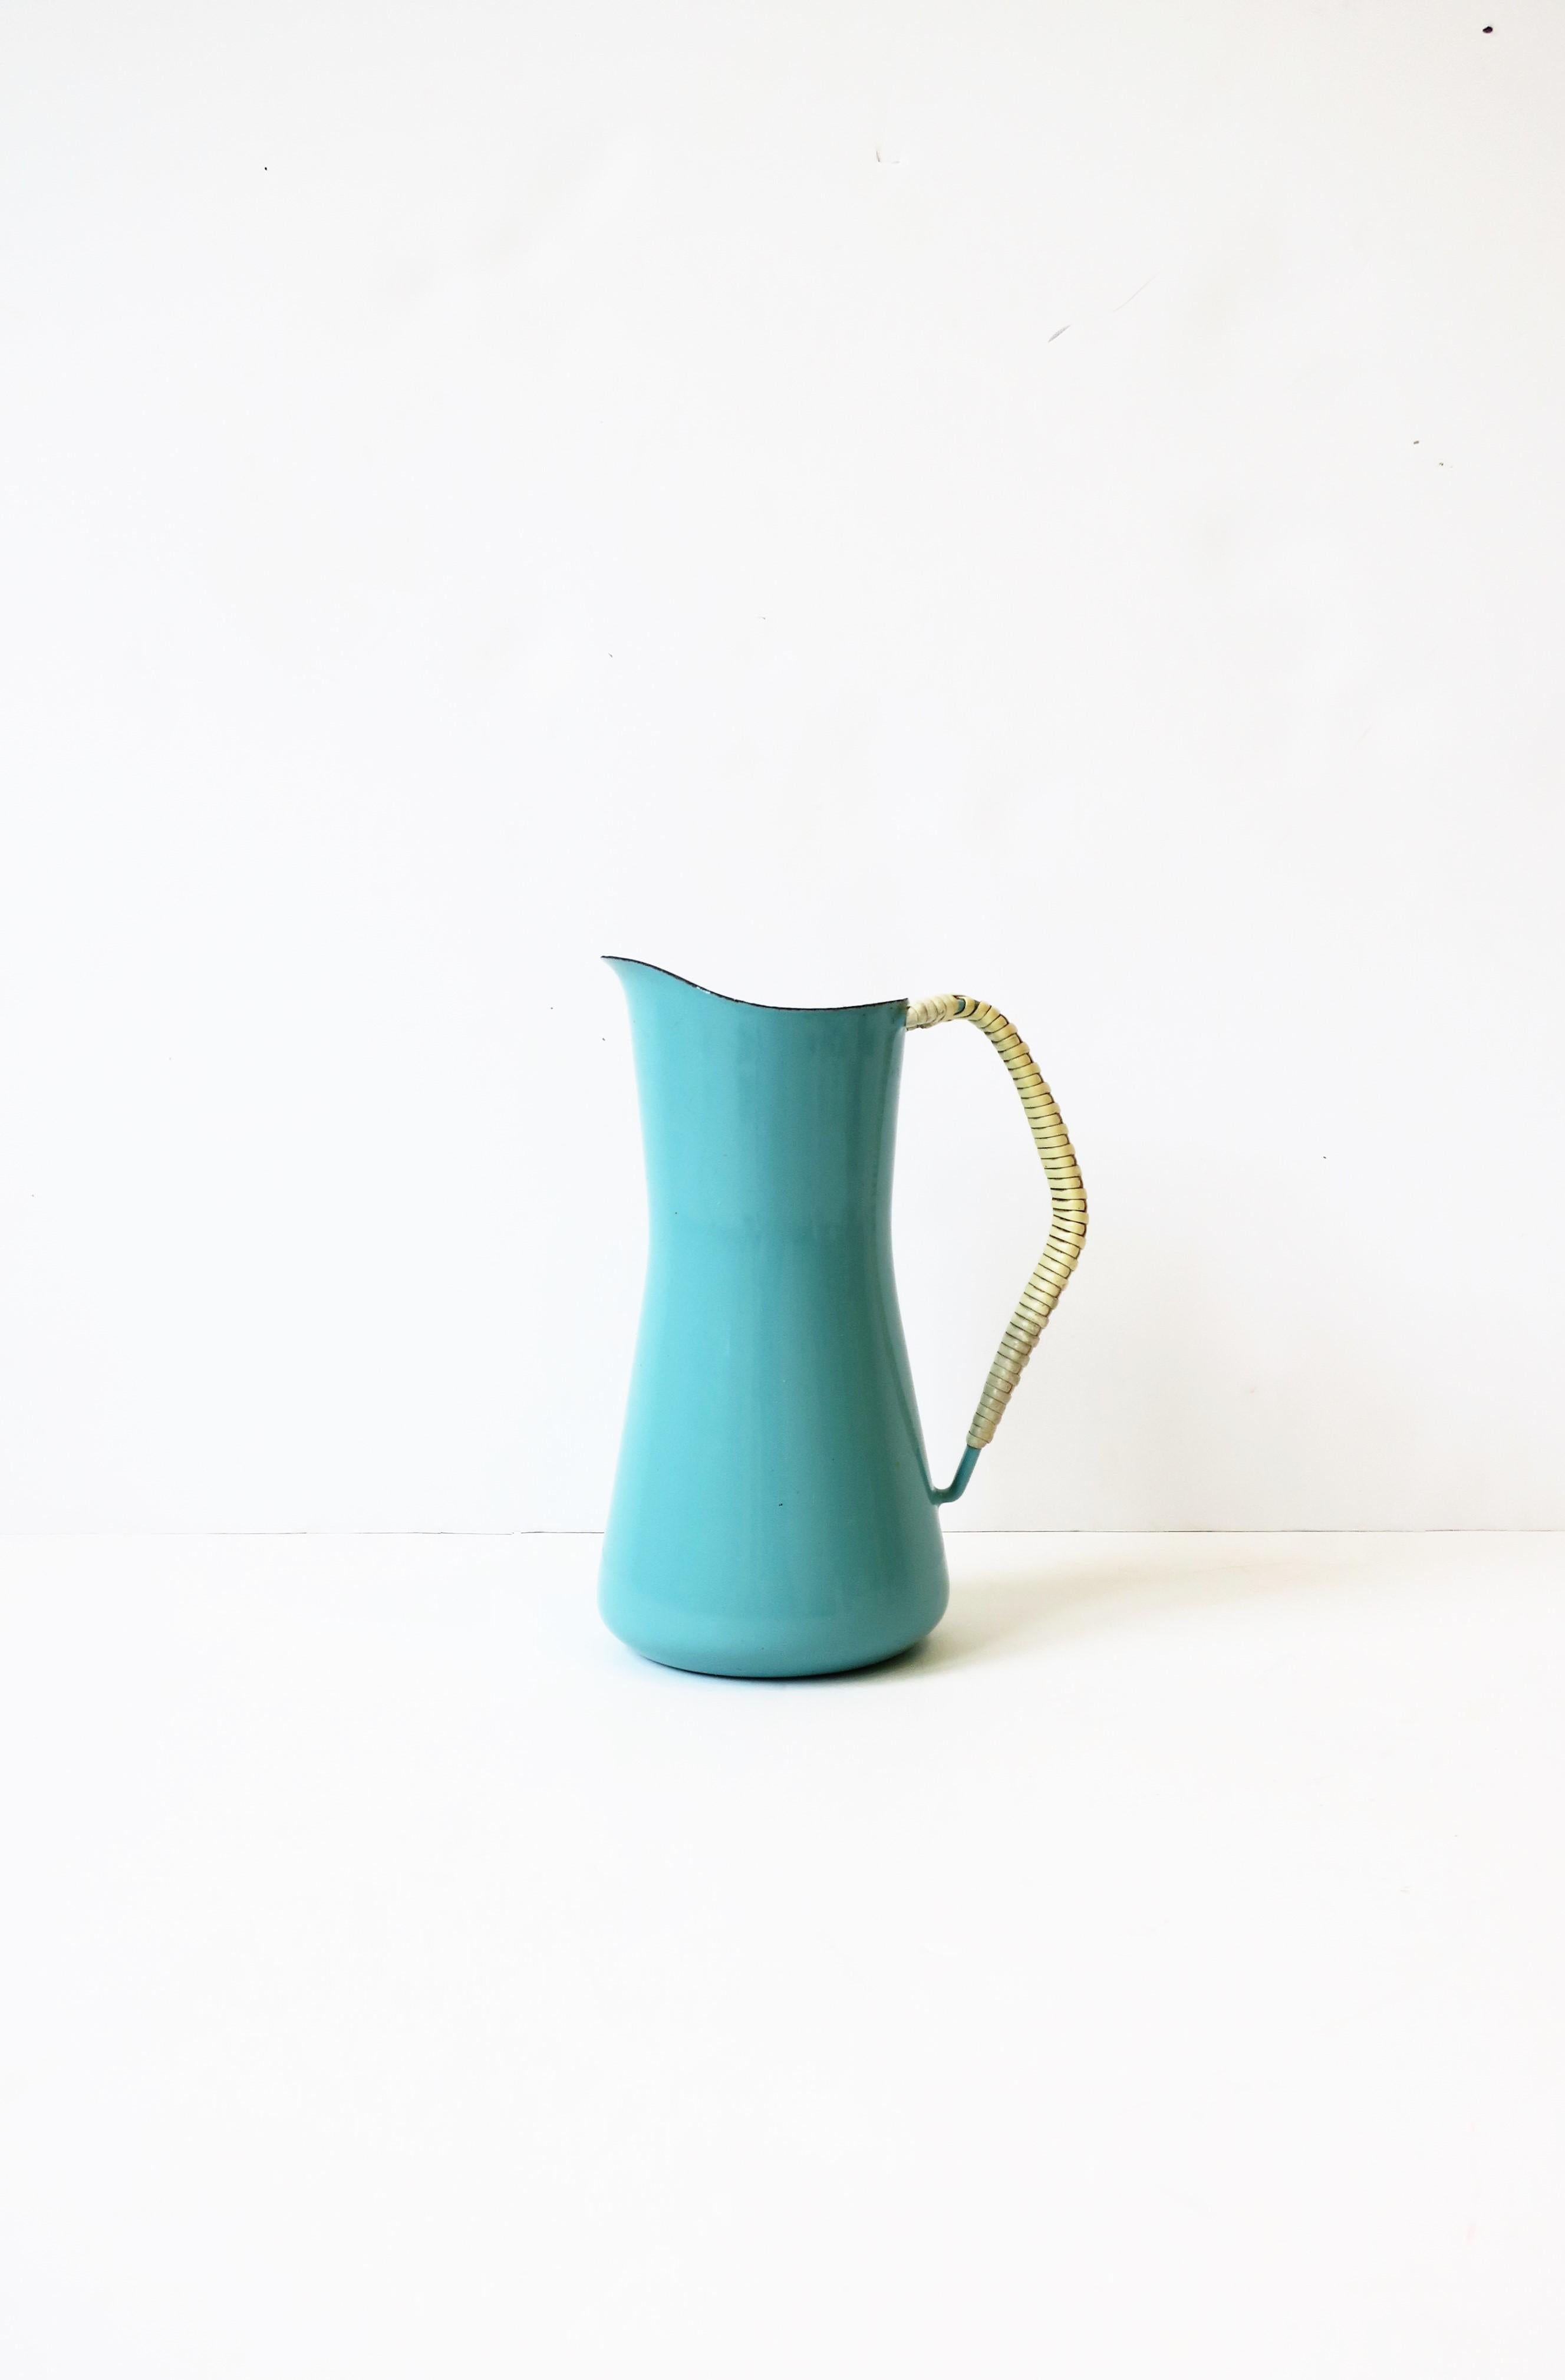 A vintage Dansk Kobenstyle Danish Scandinavian Modern turquoise blue enamel and white wicker wrapped handle pitcher, circa mid-20th century, Denmark. Great to use or display as a standalone piece of with flowers. Marked on bottom as shown.